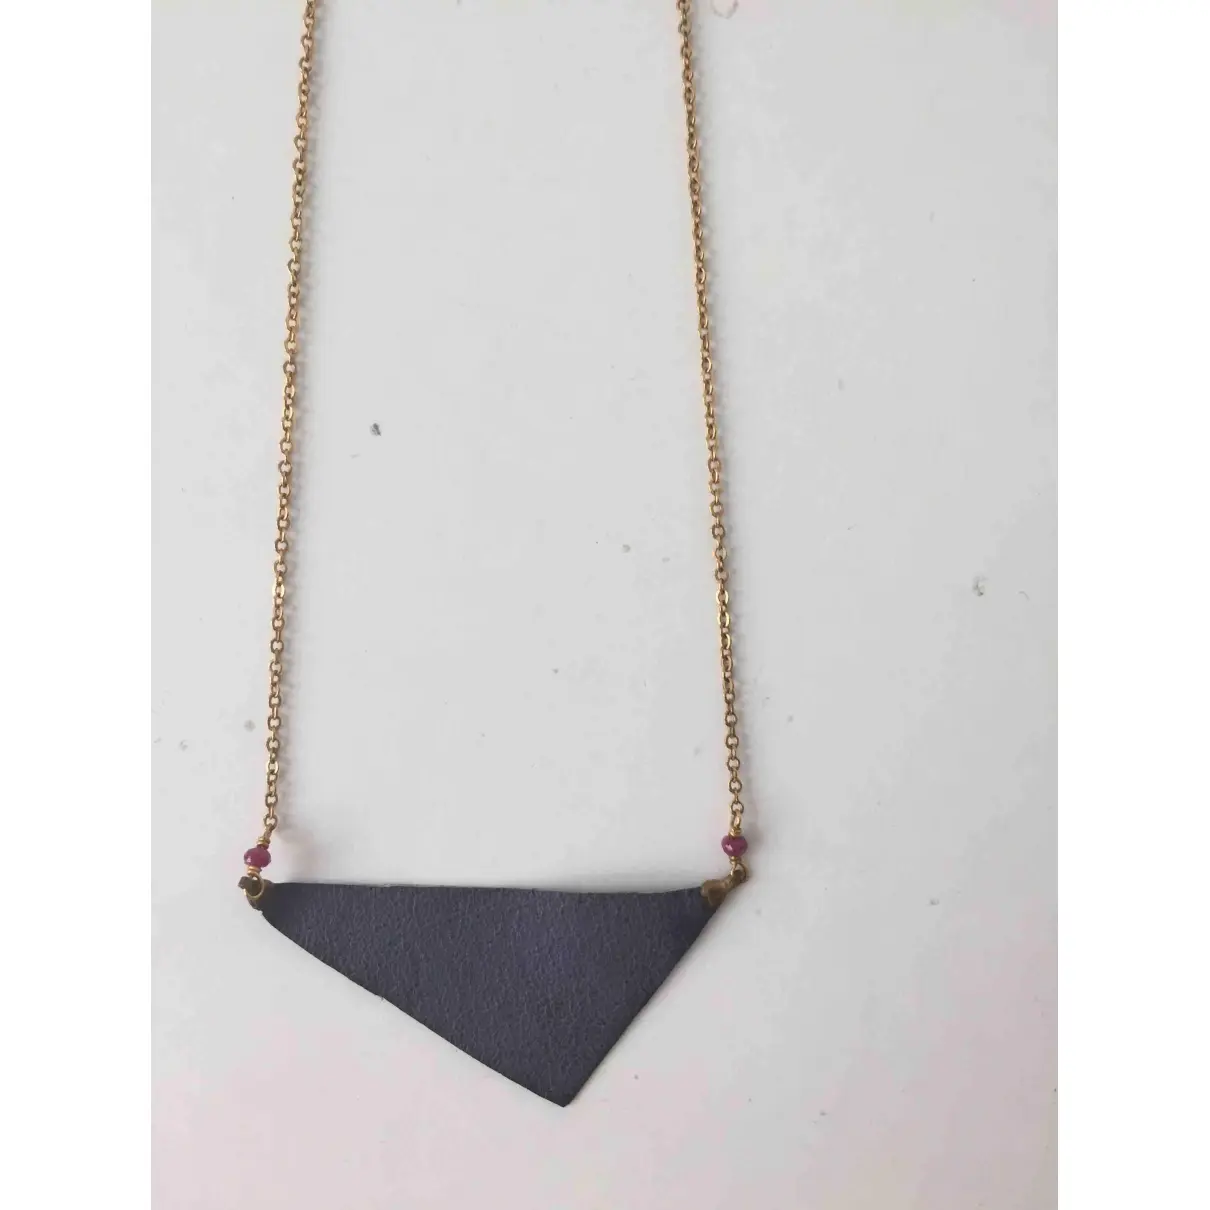 Buy Aime Necklace online